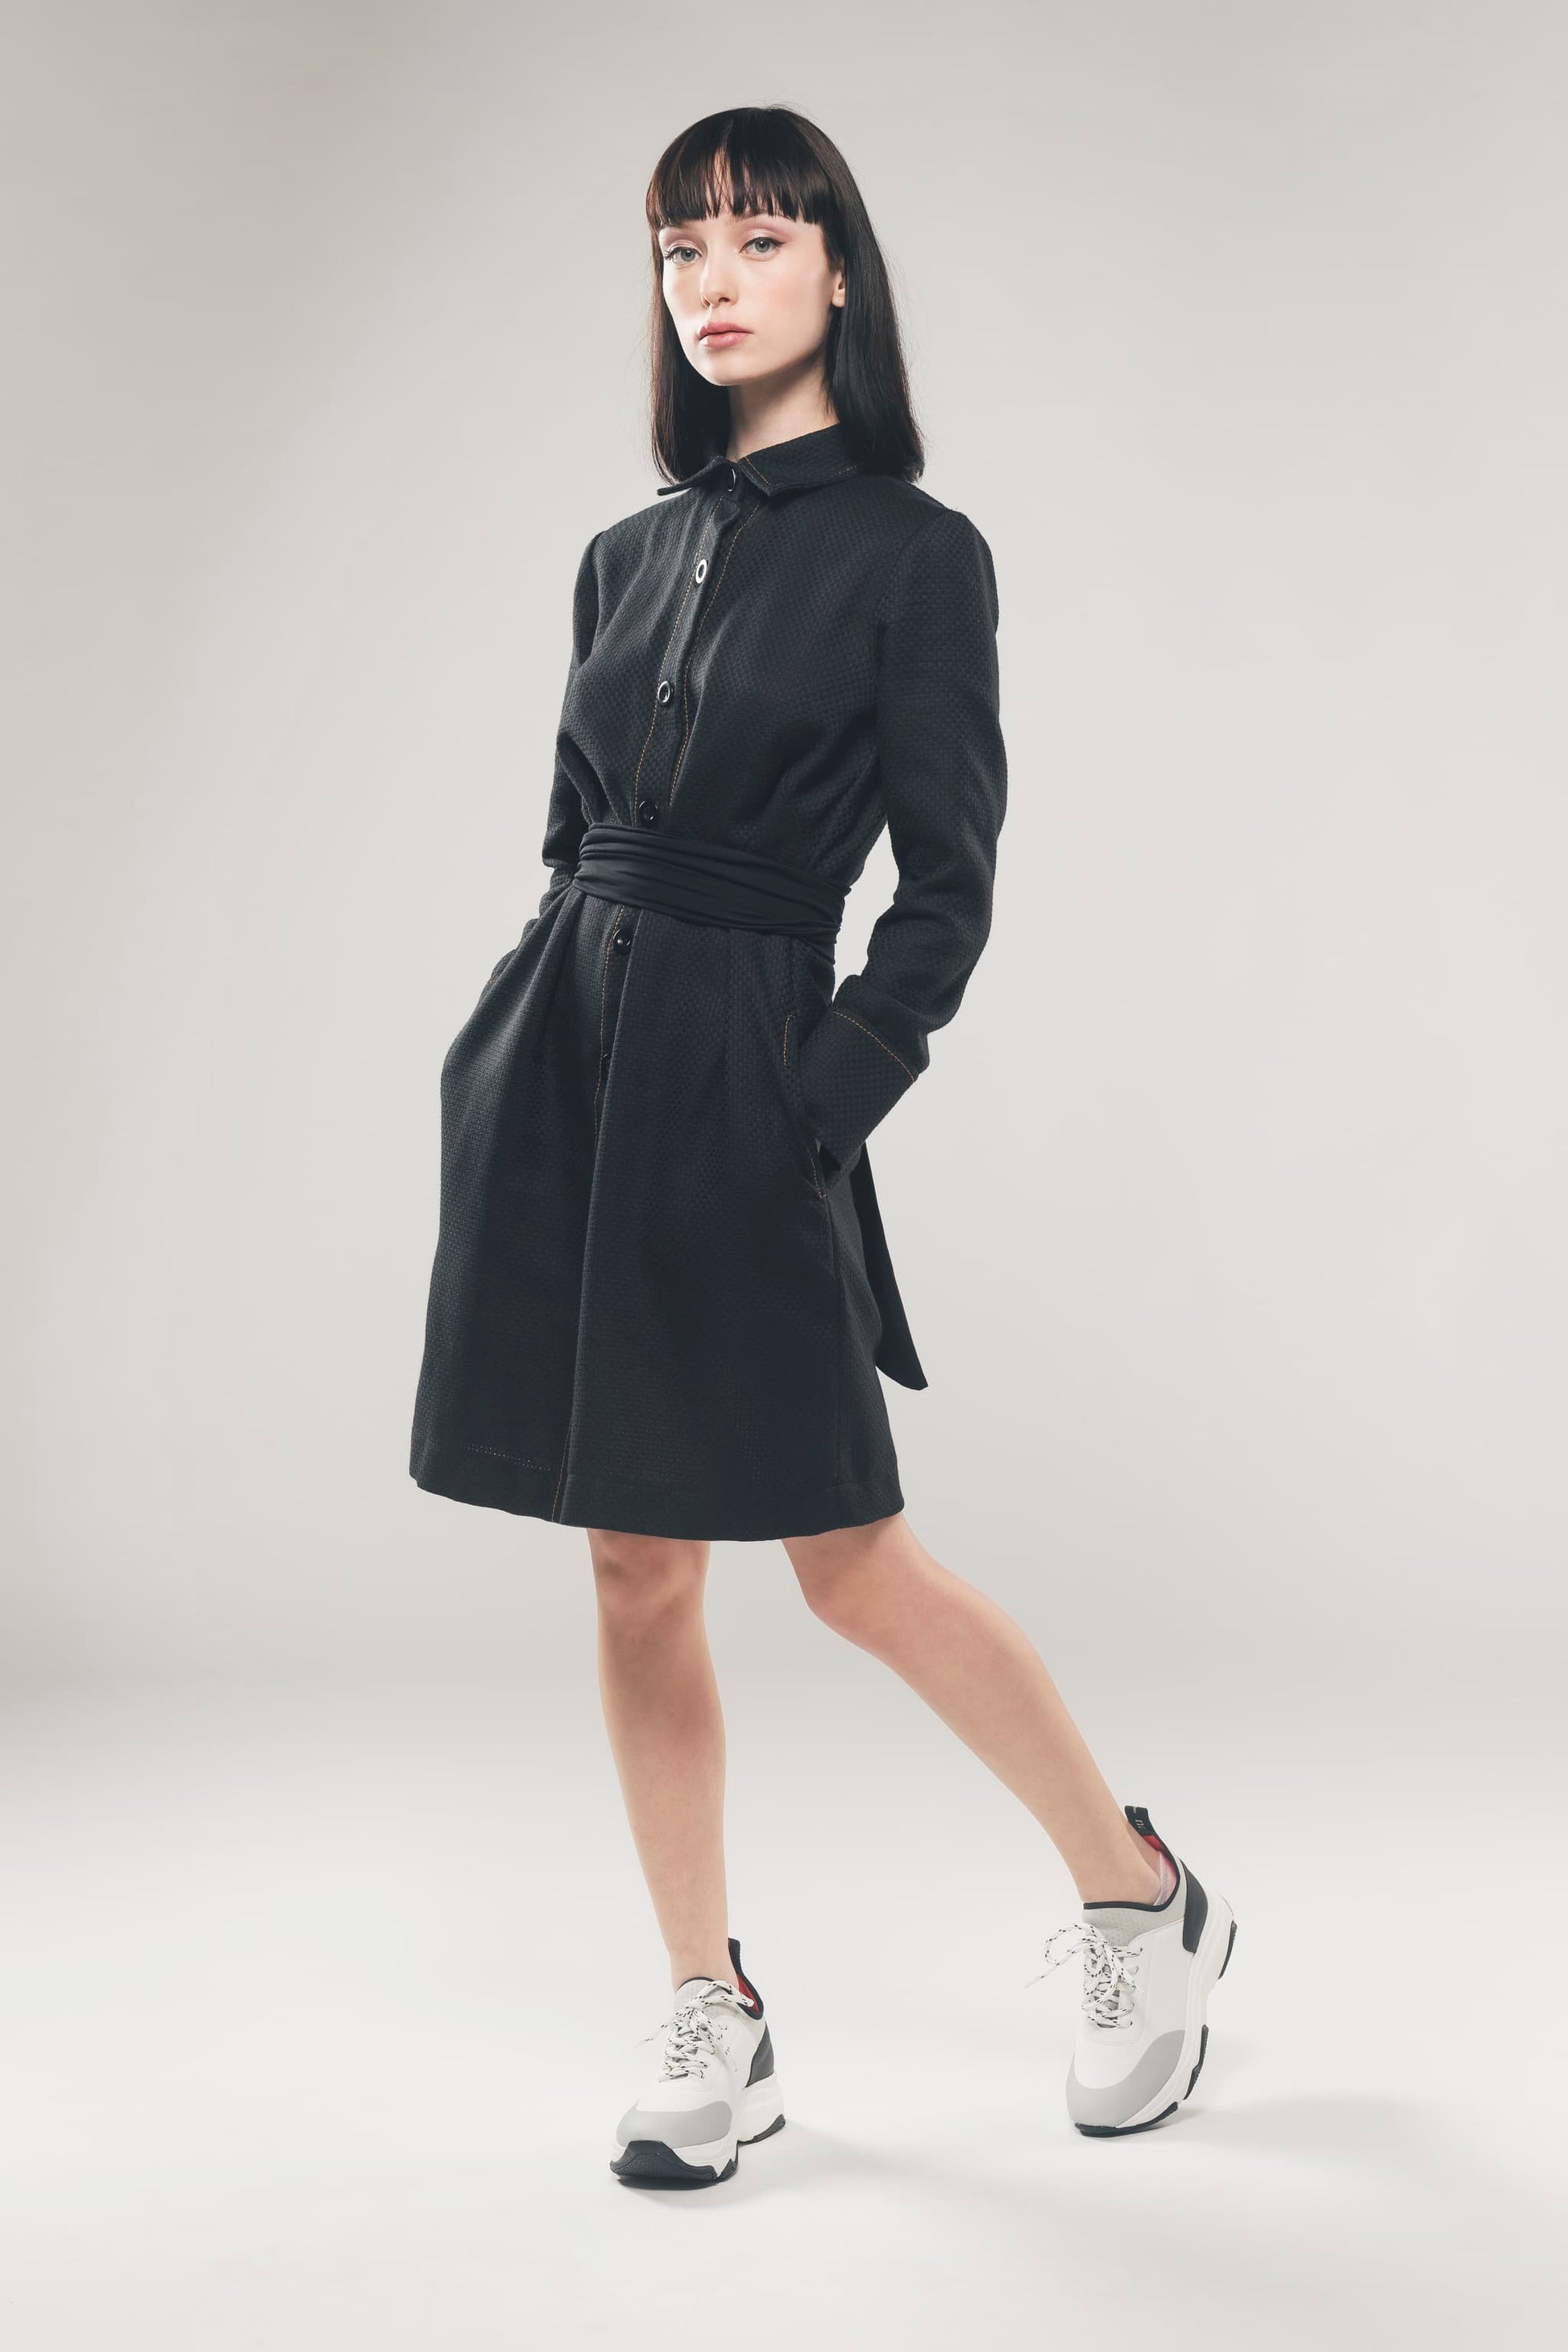 Image of organic cotton shirt dress in black made by Organique, a sustainable clothing brand.